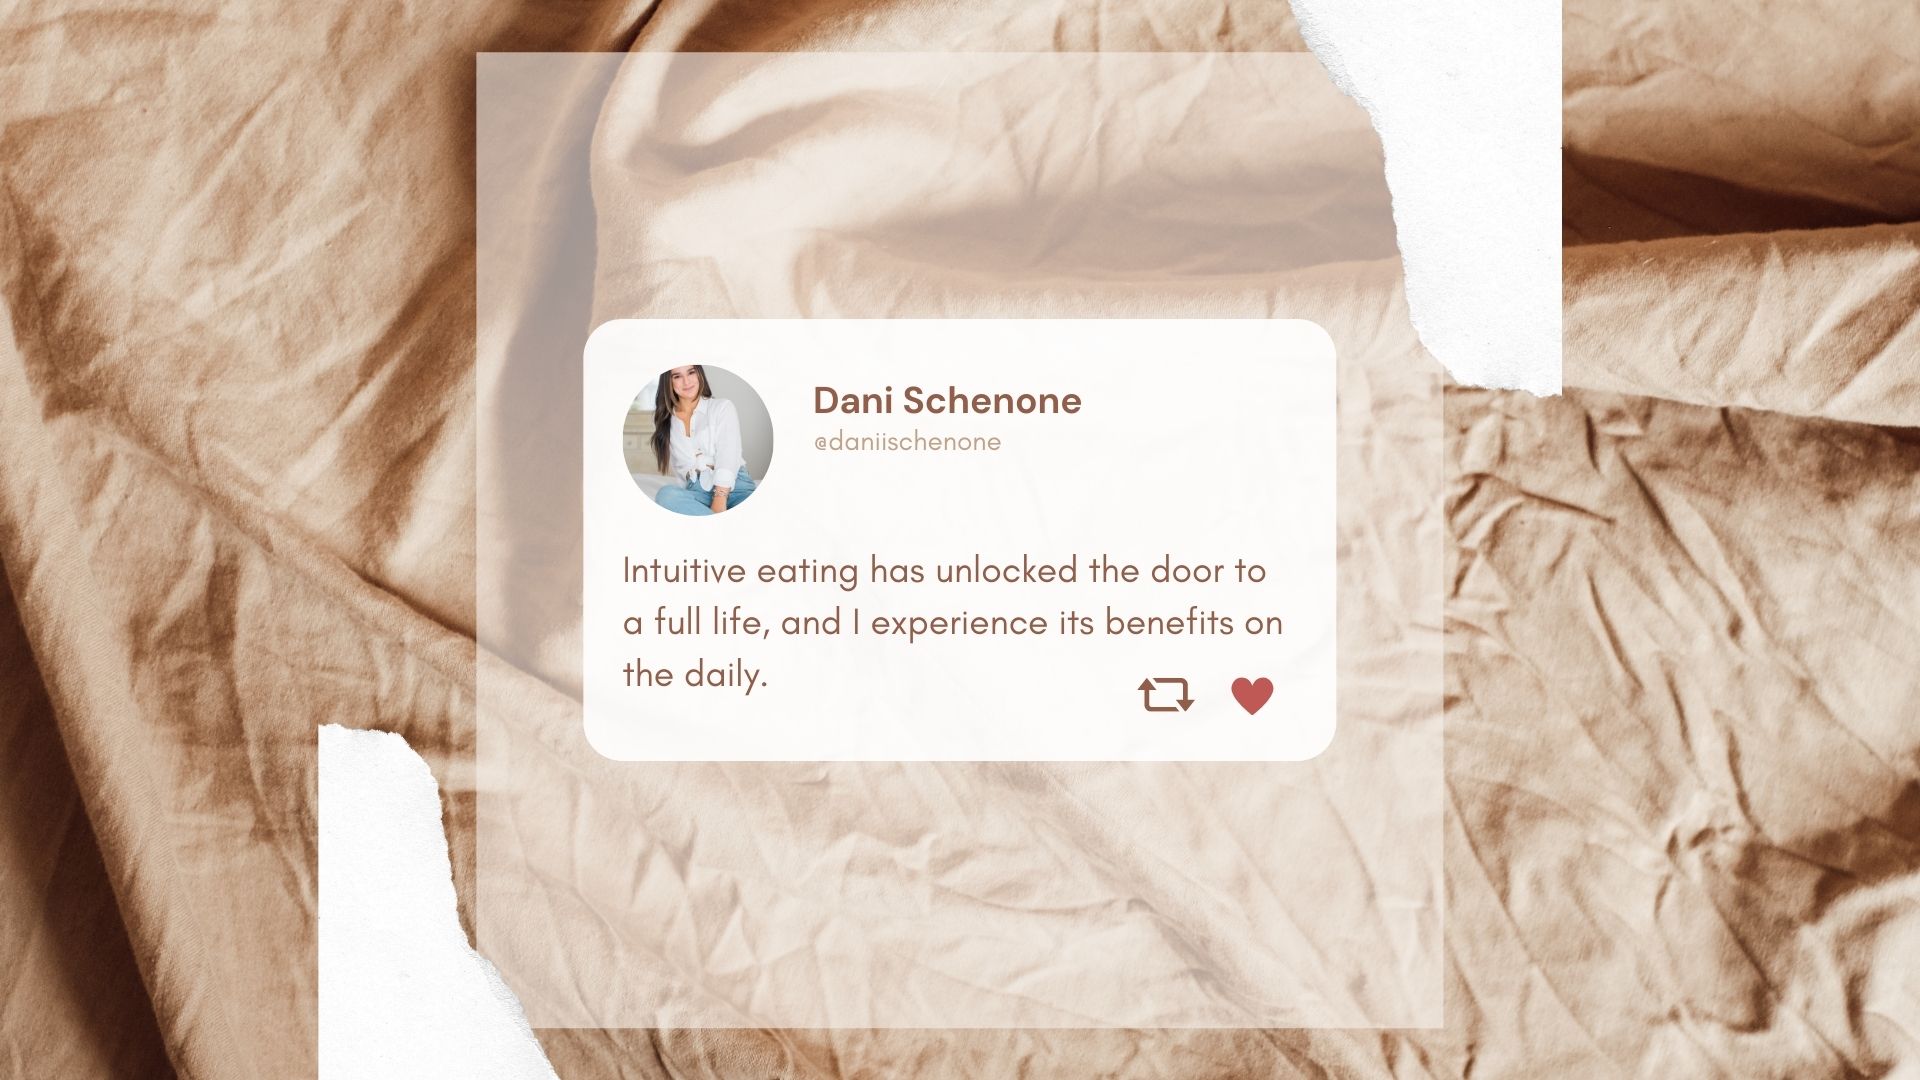 28 surprising benefits of intuitive eating dani schenone instagram post intuitive eating dani schenone dani mari health intuitive eating counselor certified intuitive eating counselor yoga registered yoga teacher certified personal trainer fitness yoga health wellness